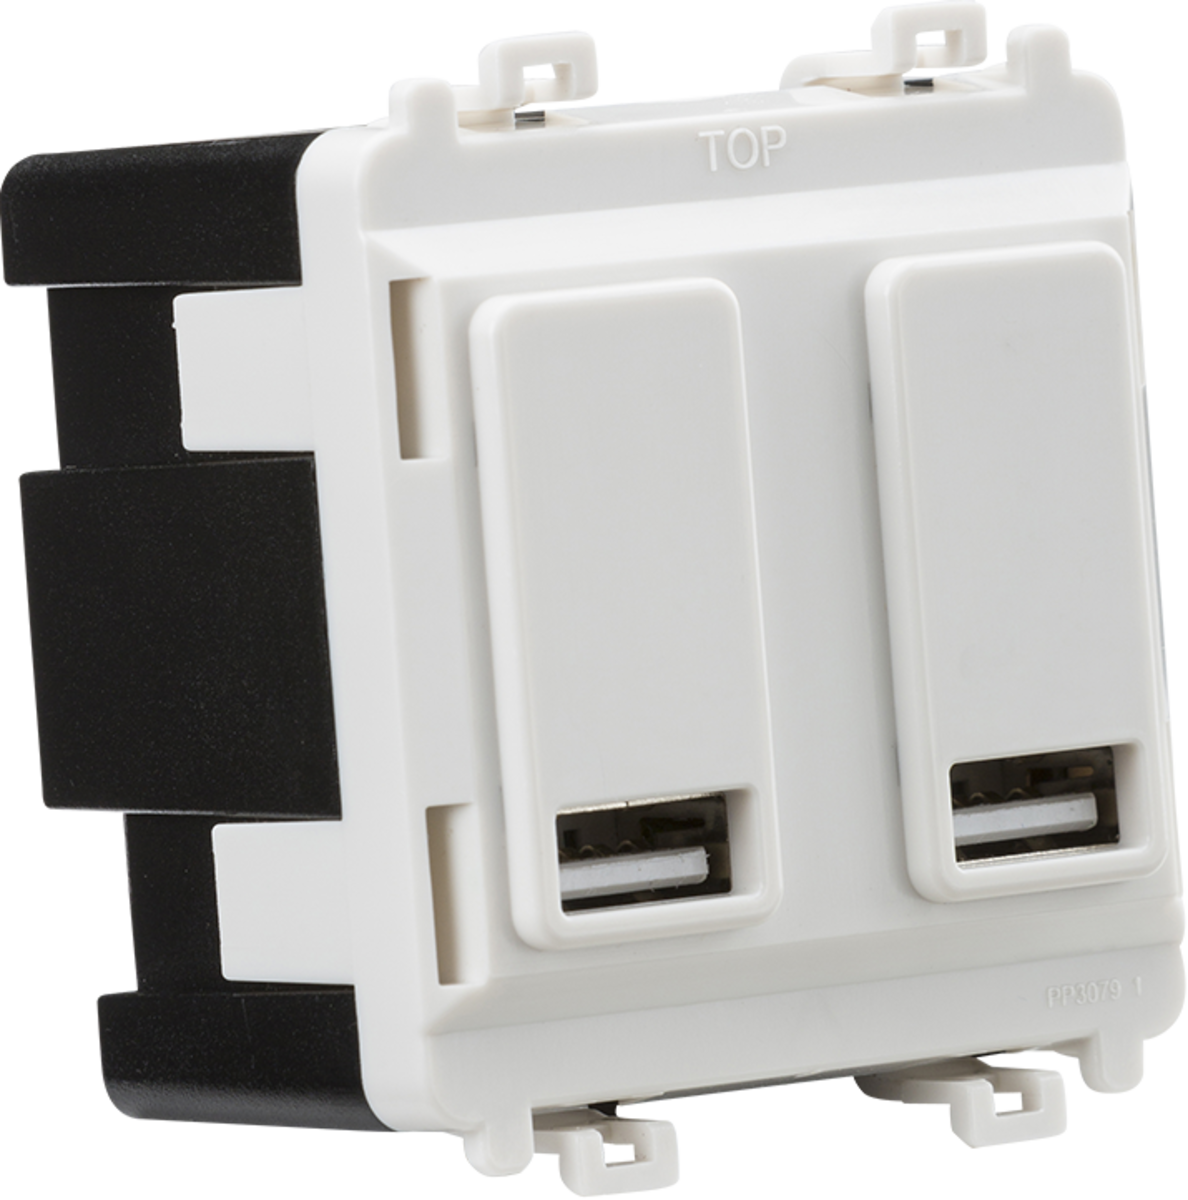 Knightsbridge Dual USB Charger Module (2 x Grid Positions) 5V 2.4A (Shared)